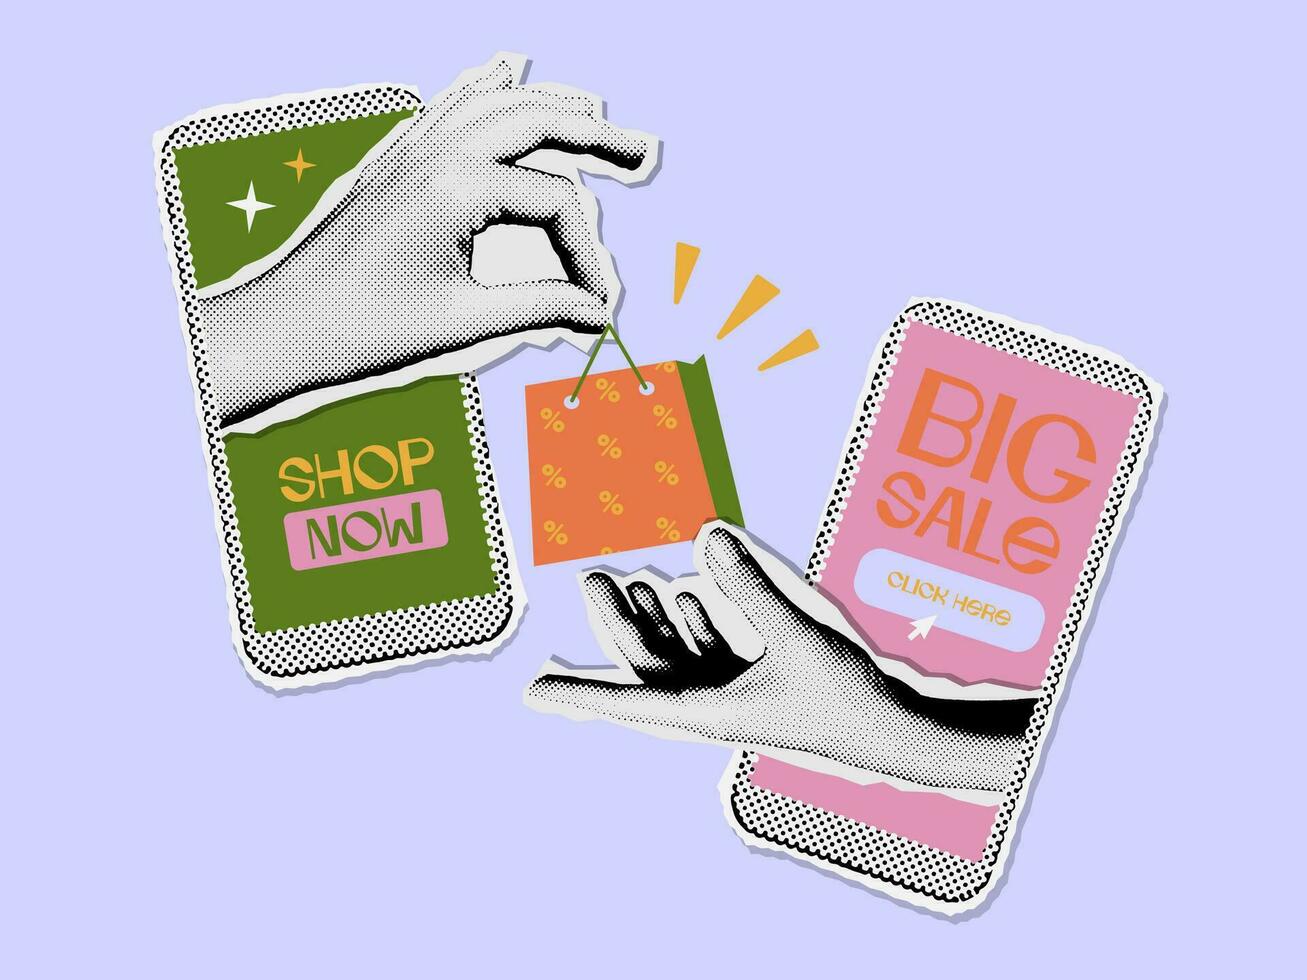 Vintage style collage on the theme of online shopping. Halftone effect hands and phones in 90s retro mixed media style. Vector illustration, big sale shopping bag in hand.